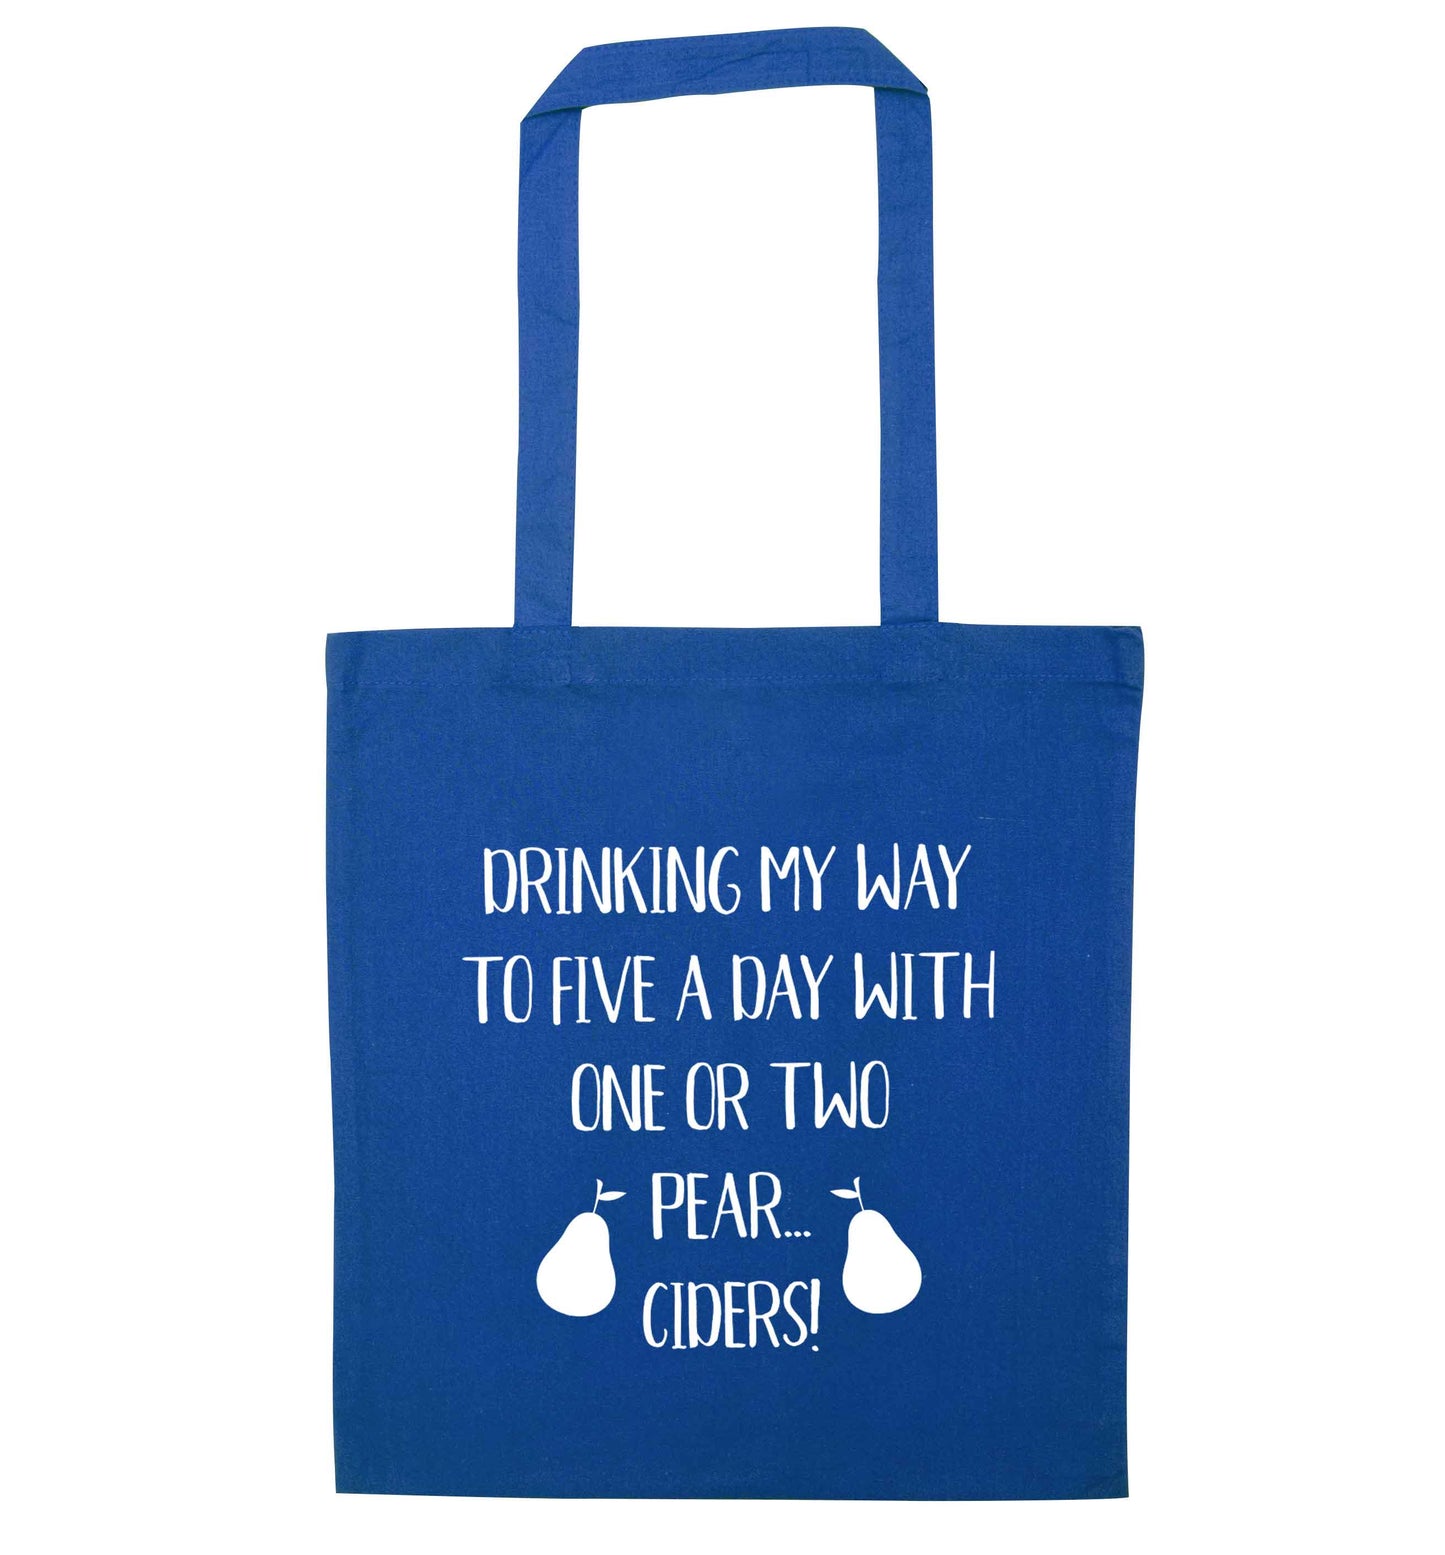 Drinking my way to five a day with one or two strawberry ciders blue tote bag